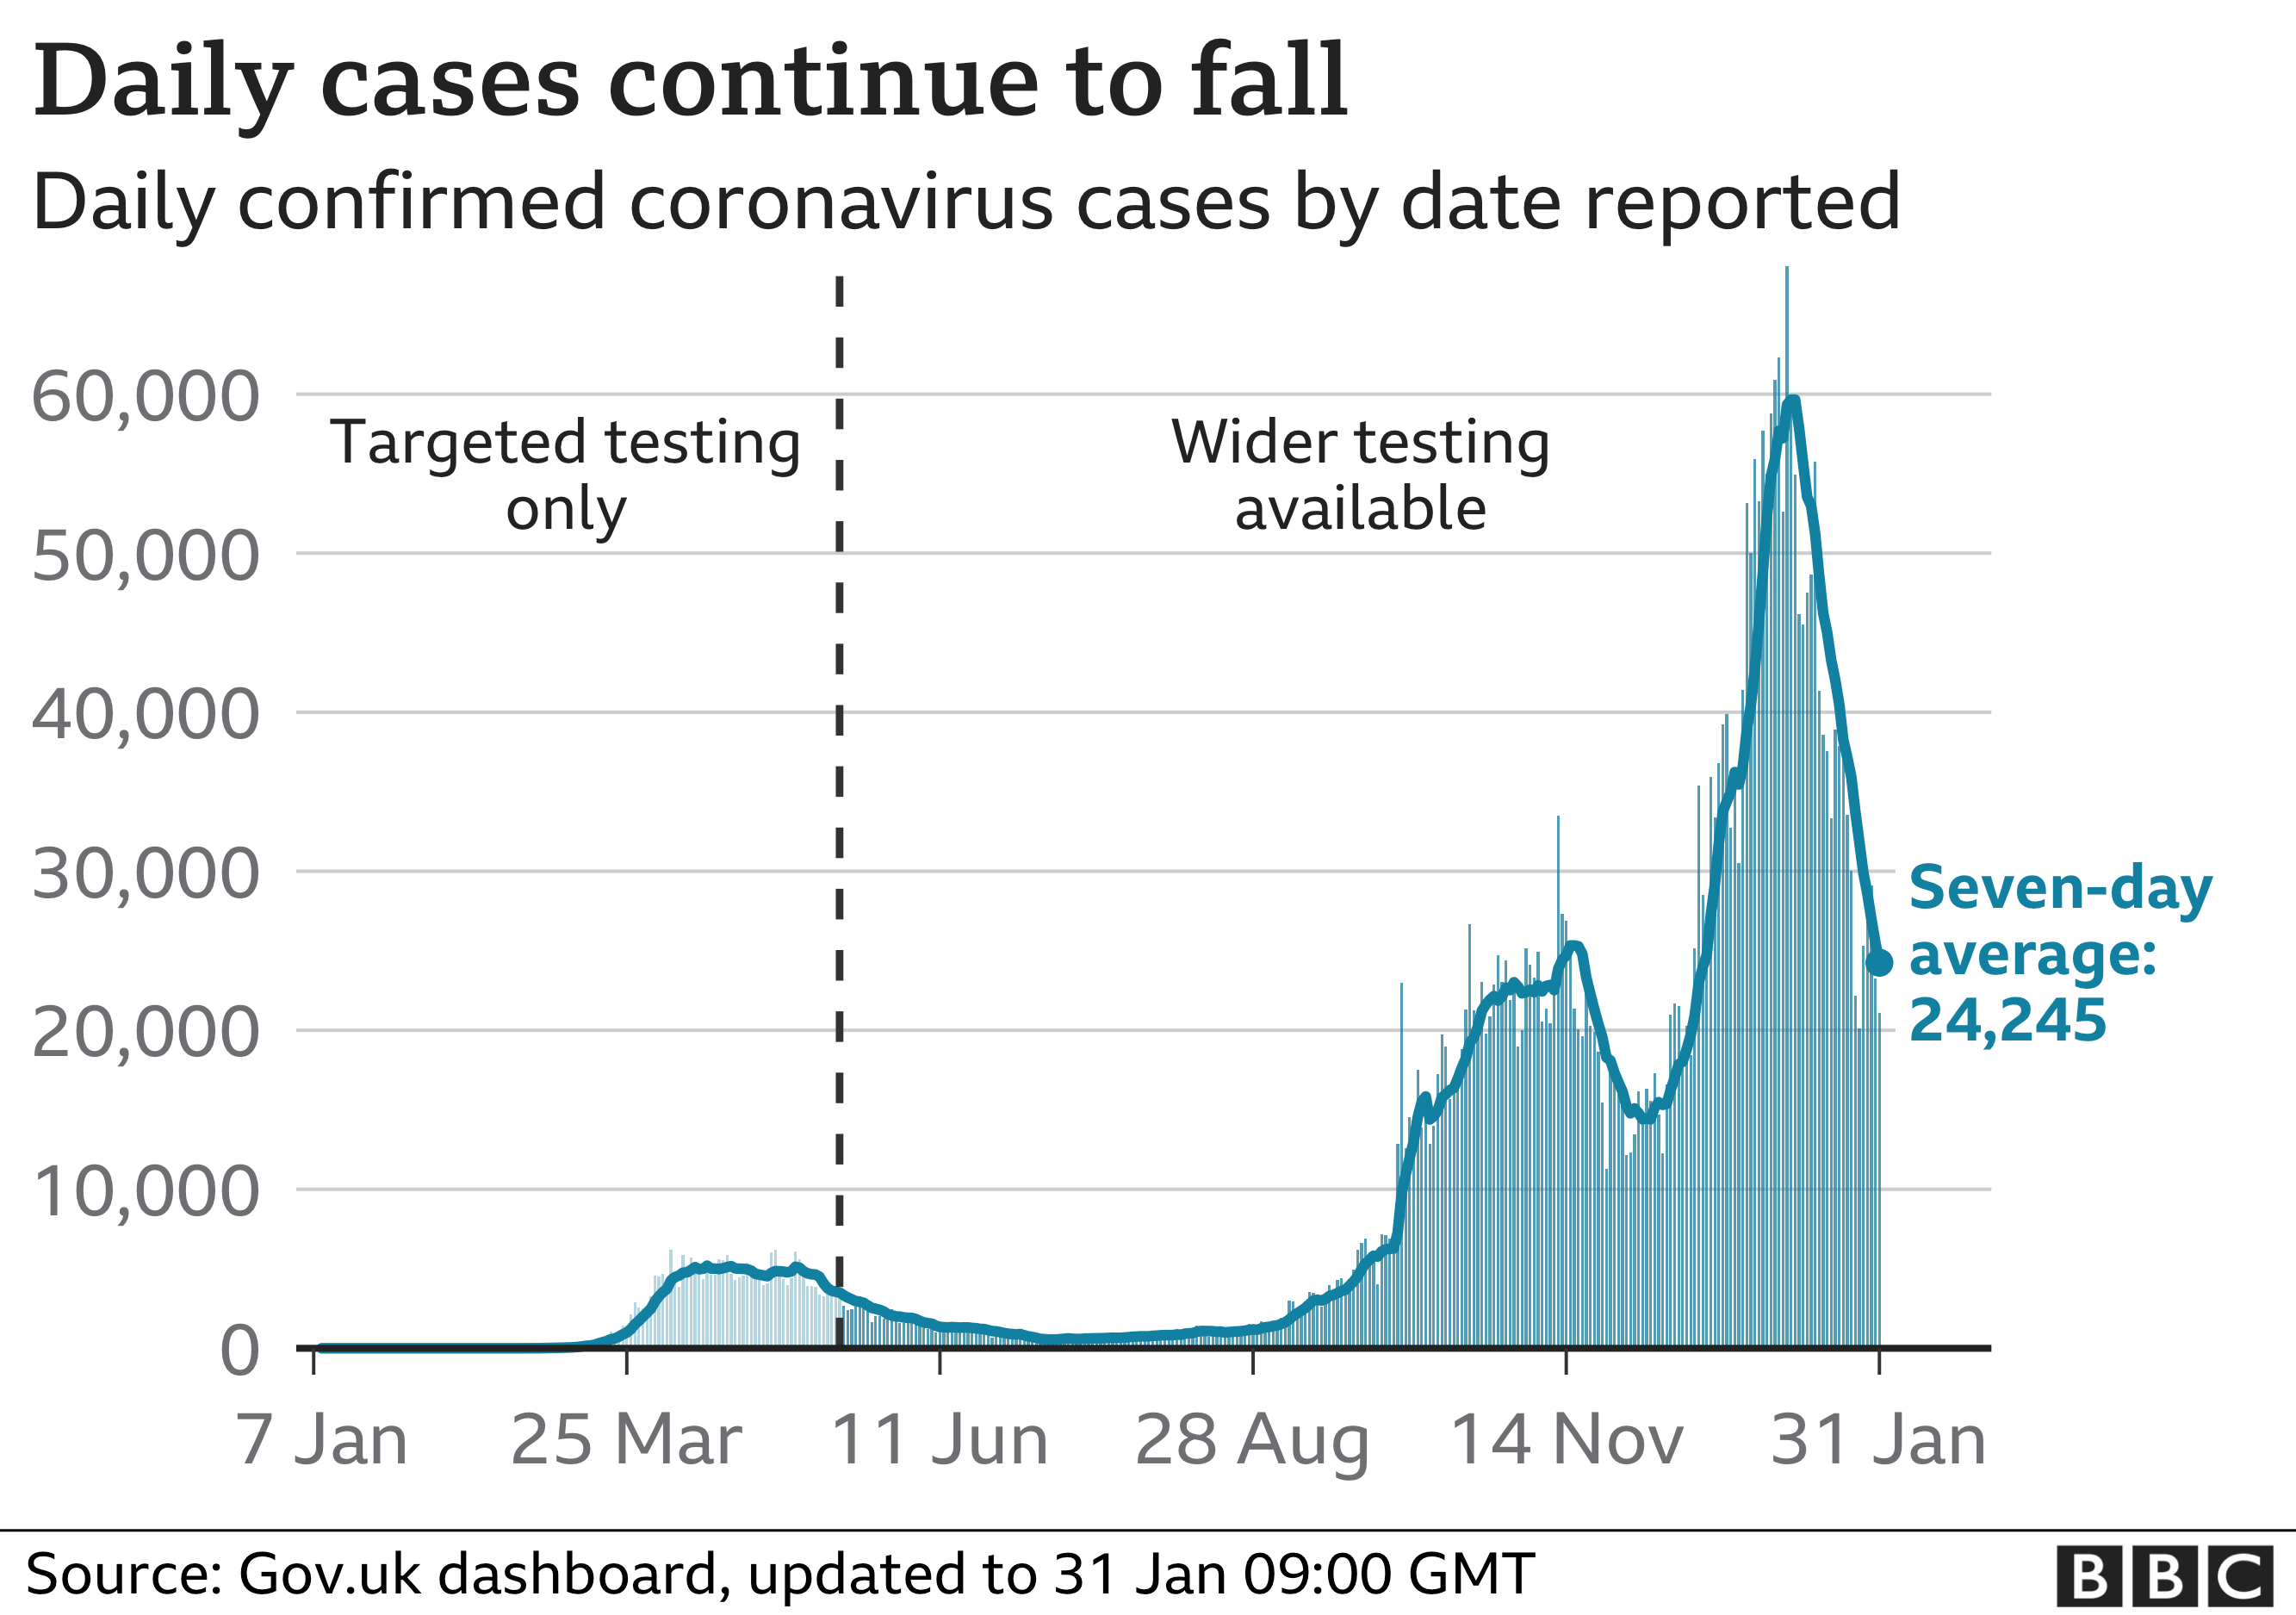 Chart shows daily cases are continuing to fall